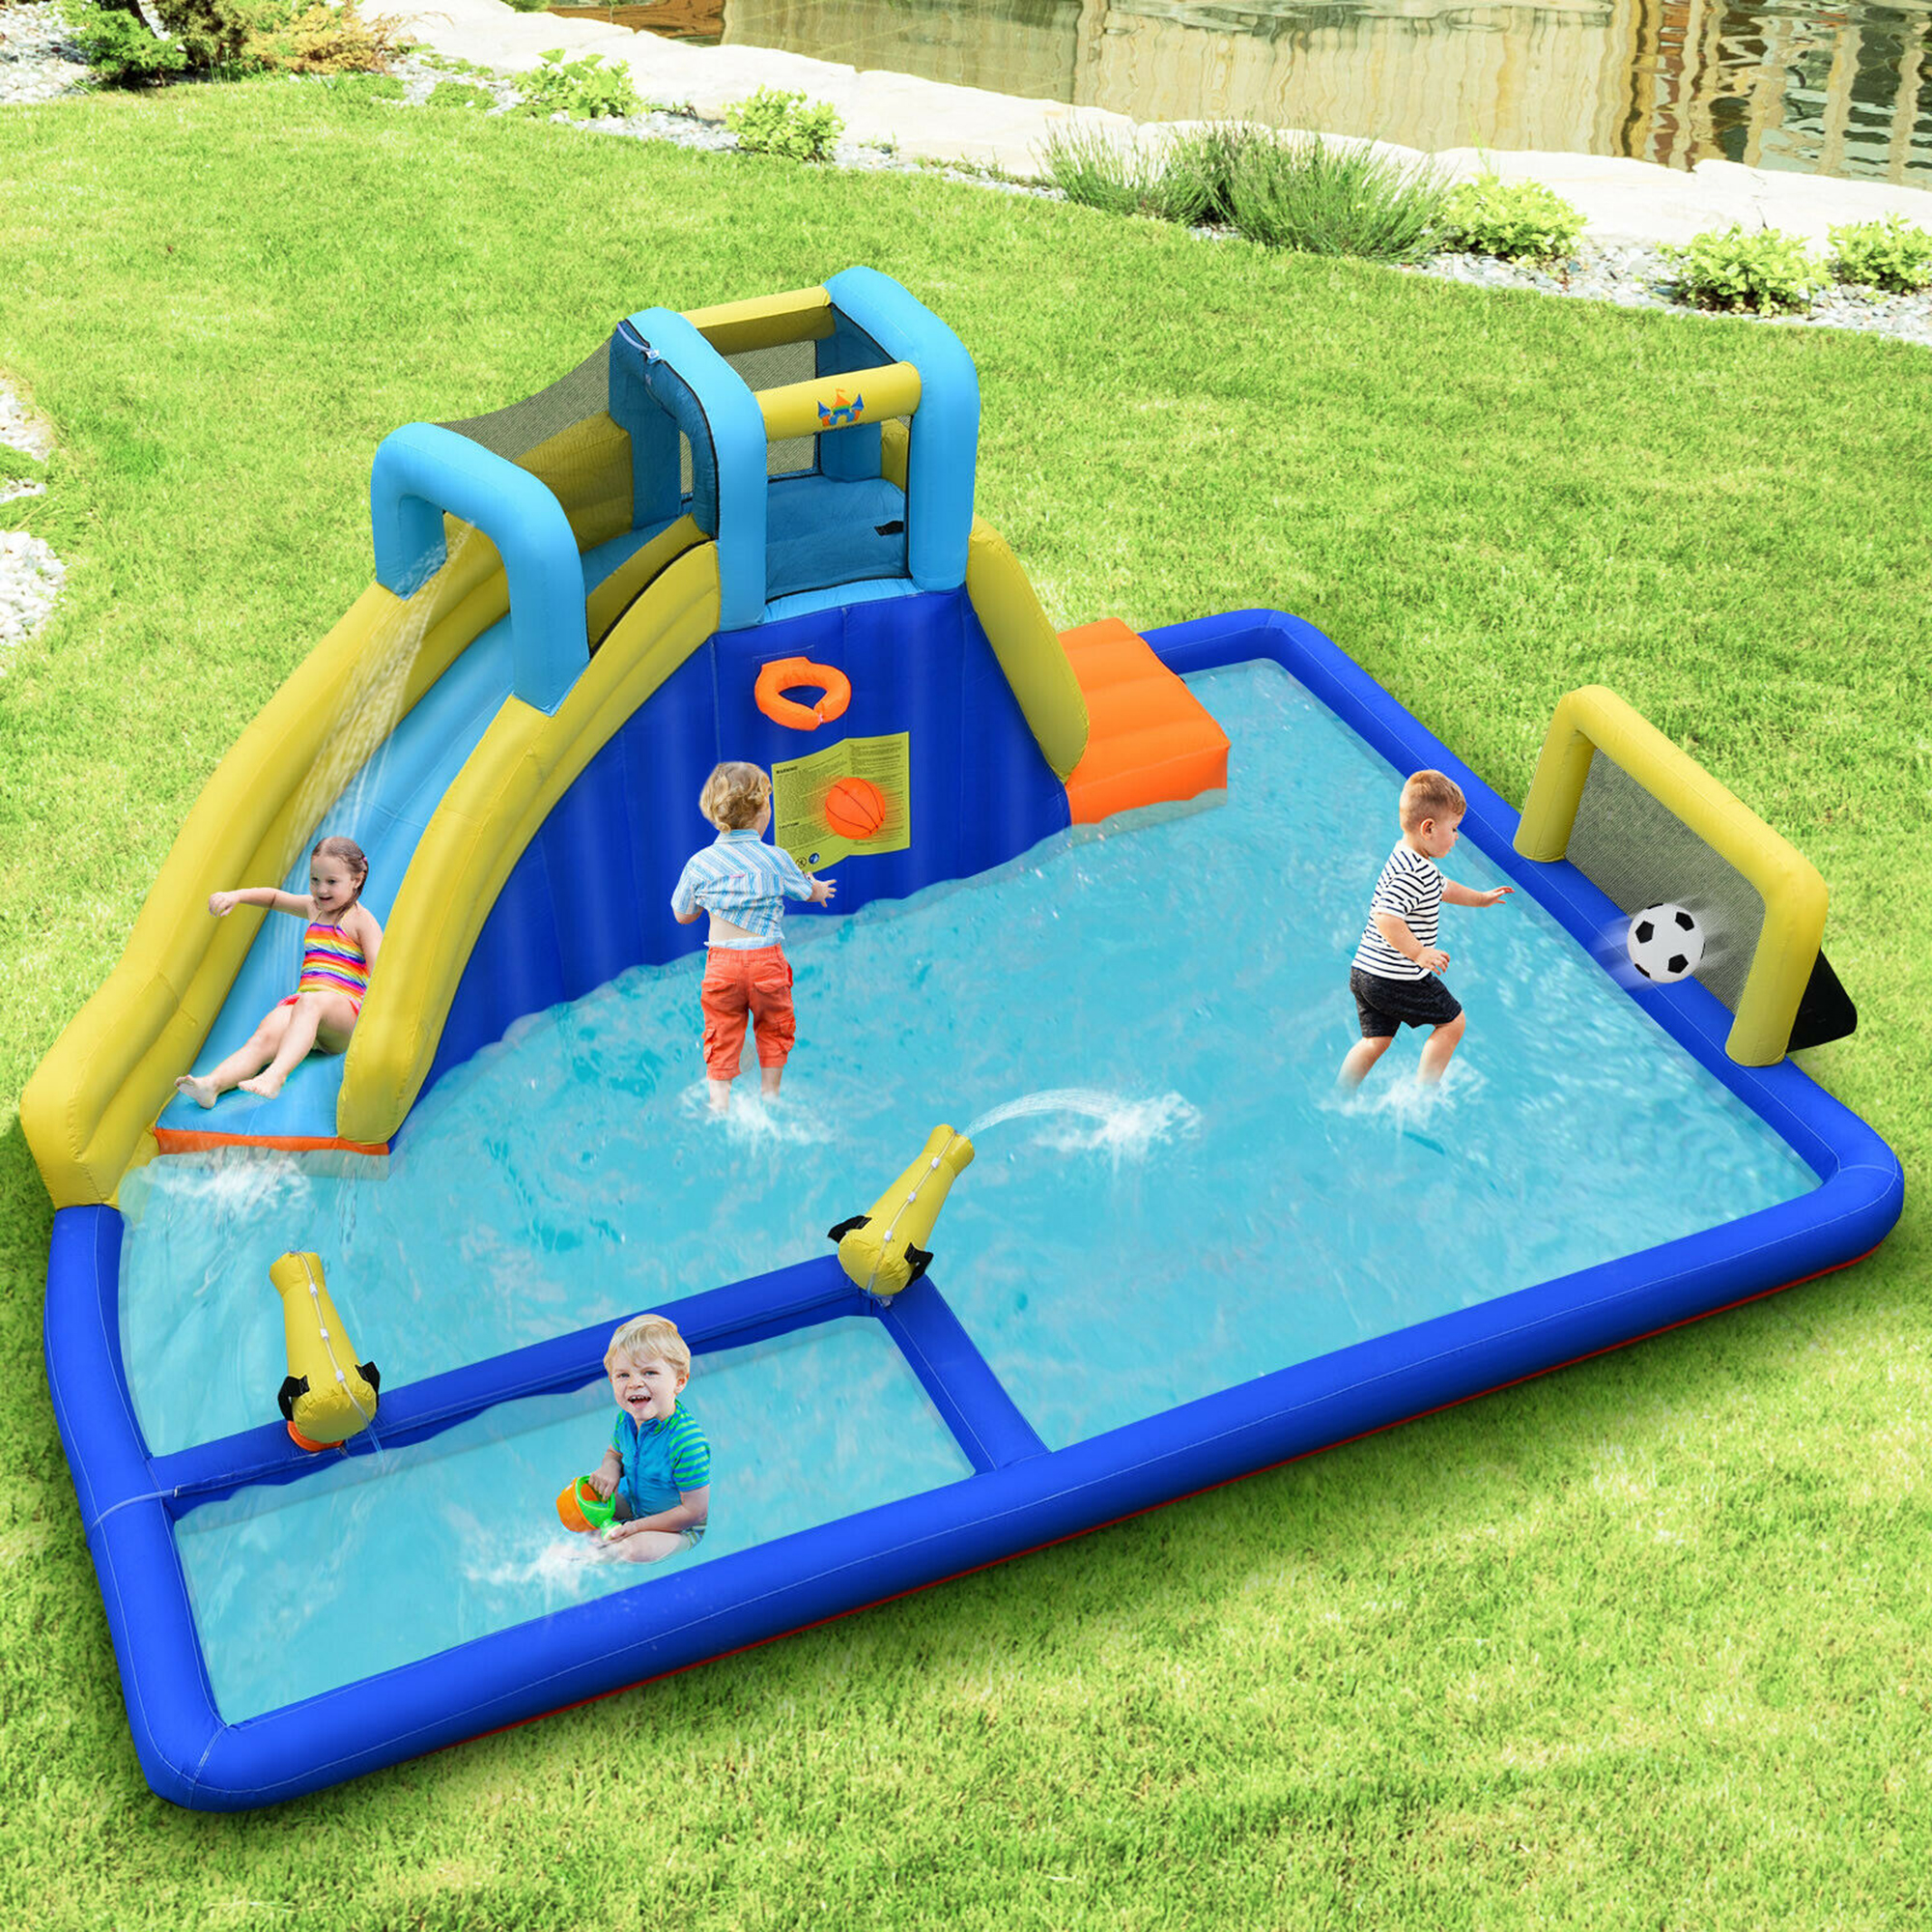 Gymax Inflatable Water Slide Bounce House Climbing Wall without Blower - image 3 of 10